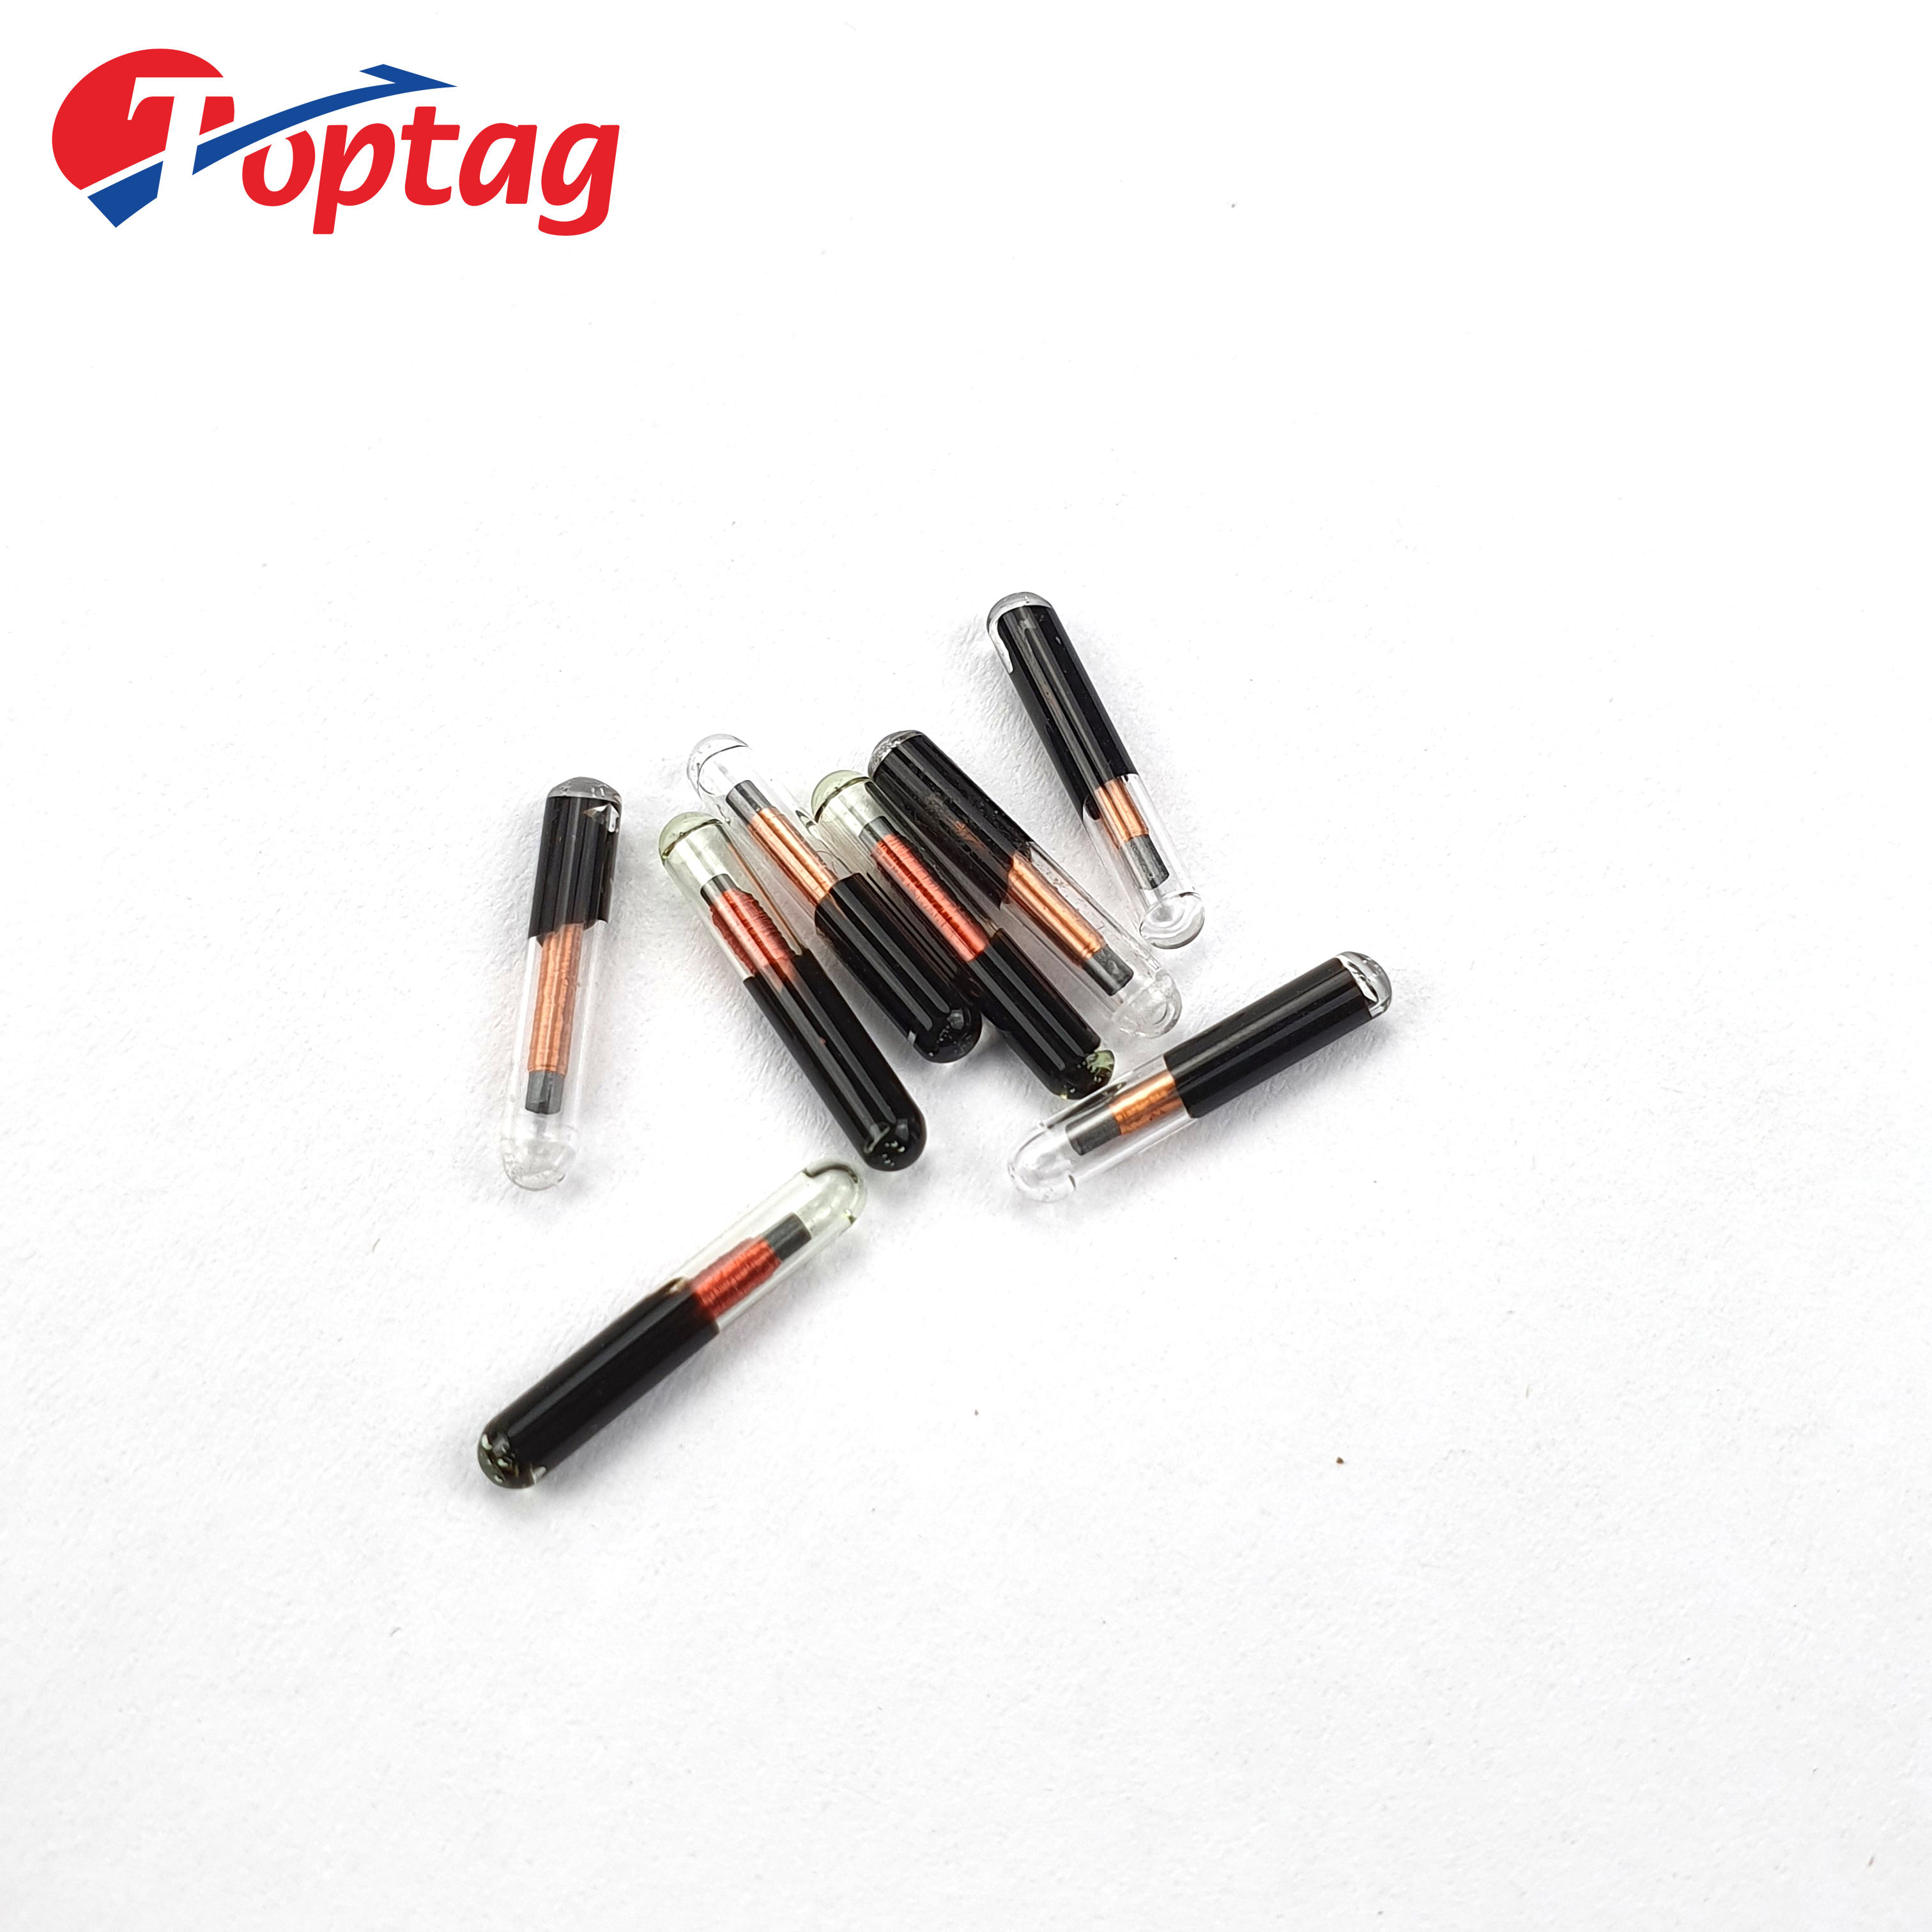 rfid glass capsule microchip tag with syringe For animal Identification glass sticker rfid tag